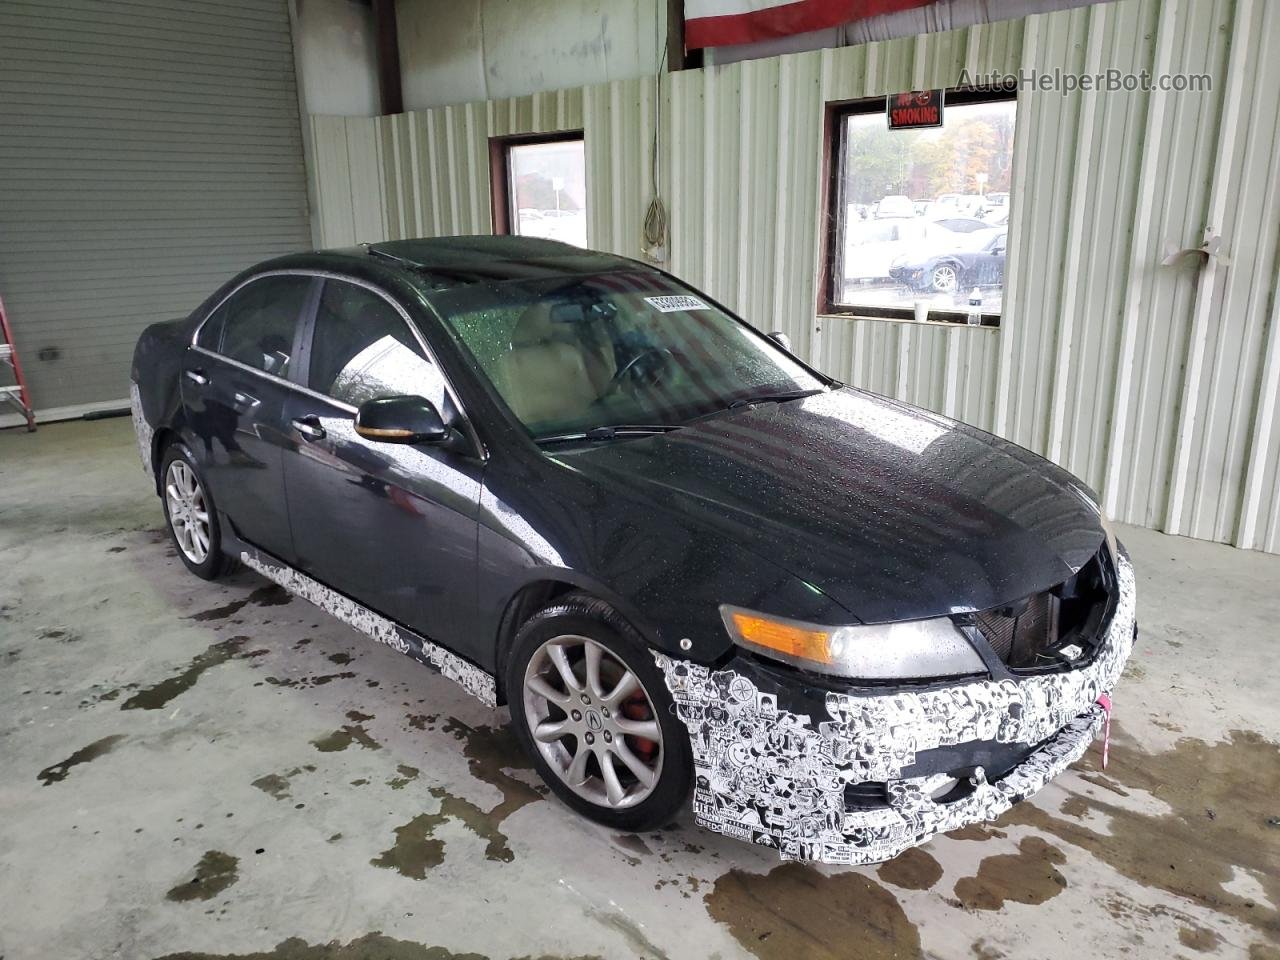 Price & History 2008 Acura Tsx 2.4l 4 vin: JH4CL96818C010308 